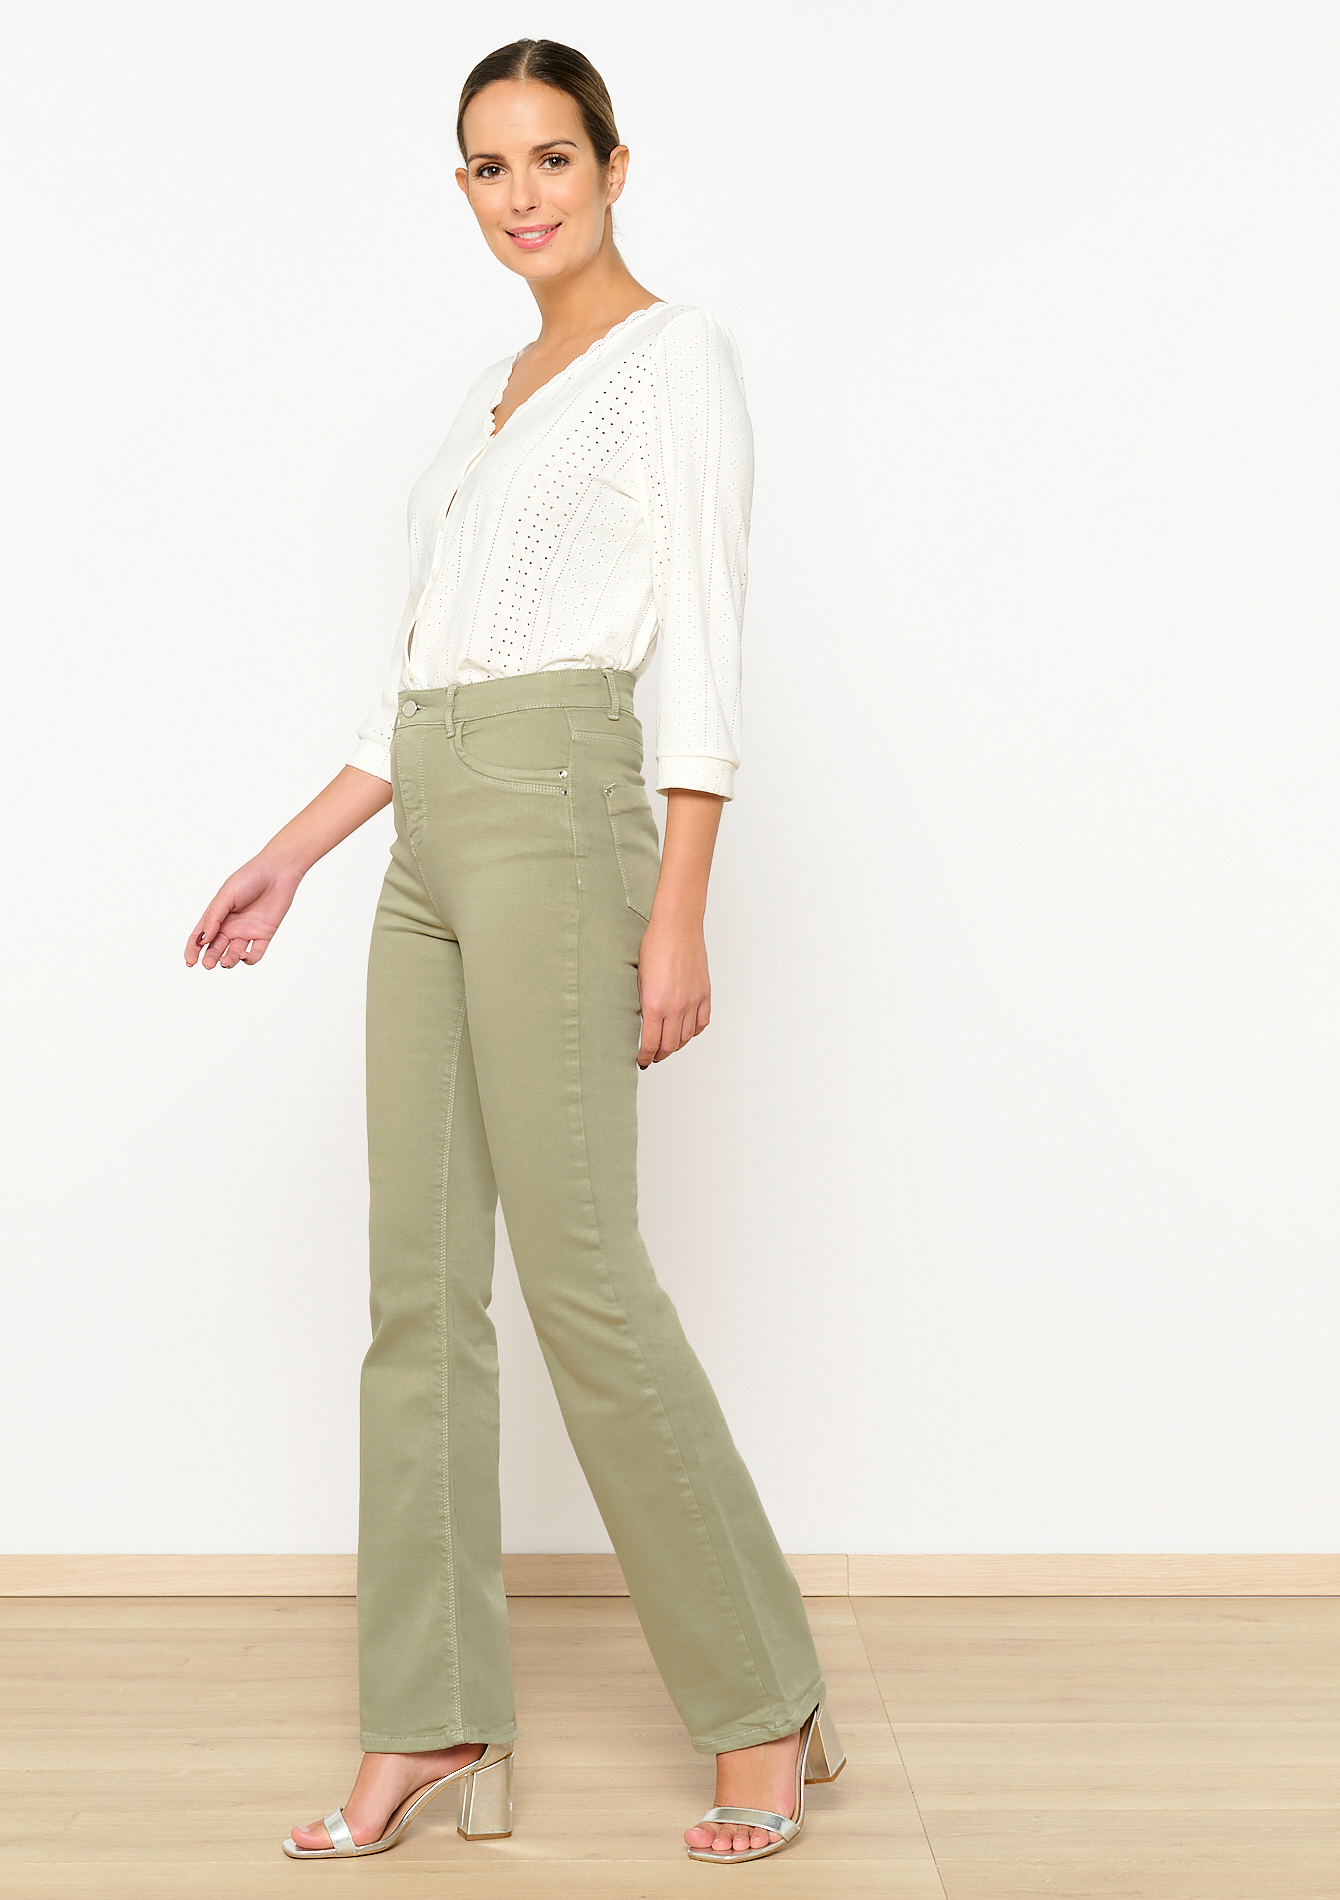 Express | High Waisted Seamed Bootcut Pant in Espresso Brown | Express  Style Trial